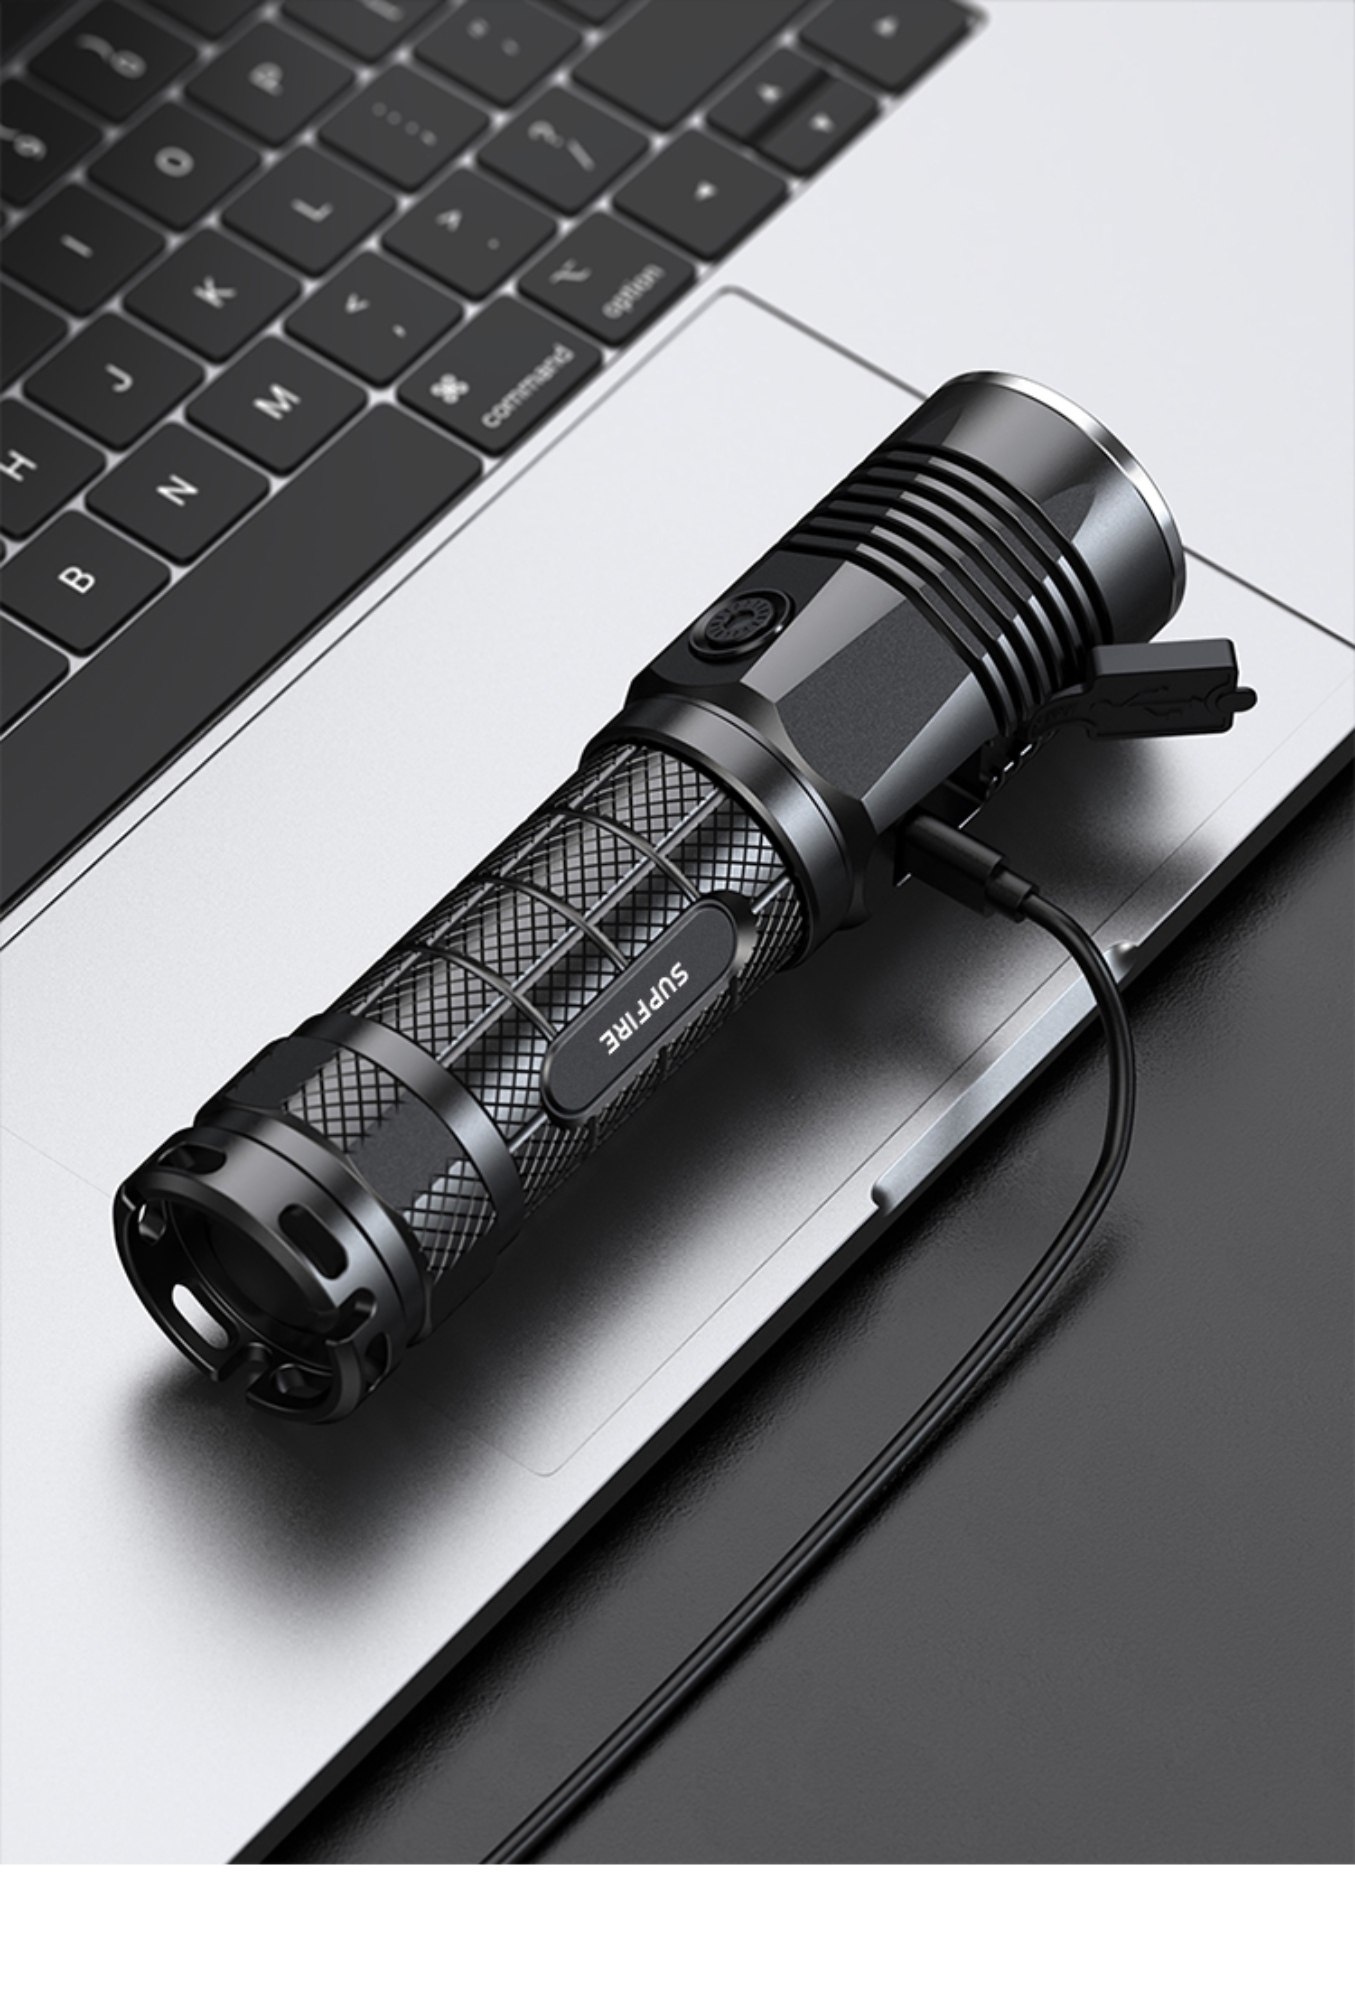 SupFire L5-S(P90) search lights Rechargeable flashlight